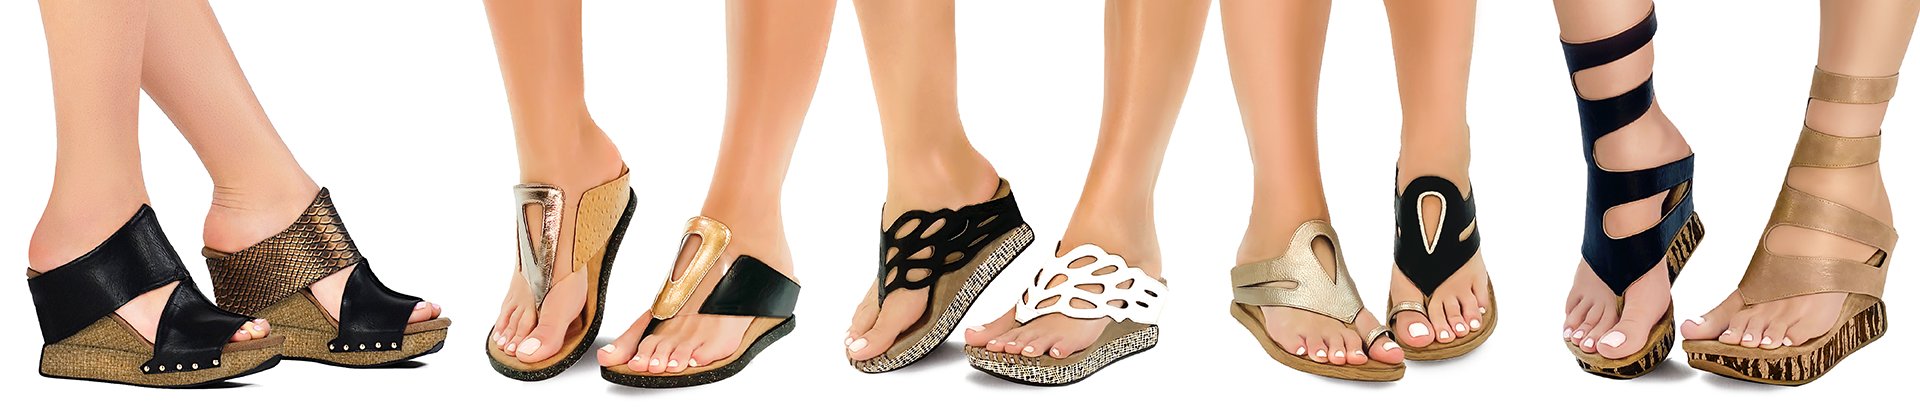 A collection of women's wedges in various colors